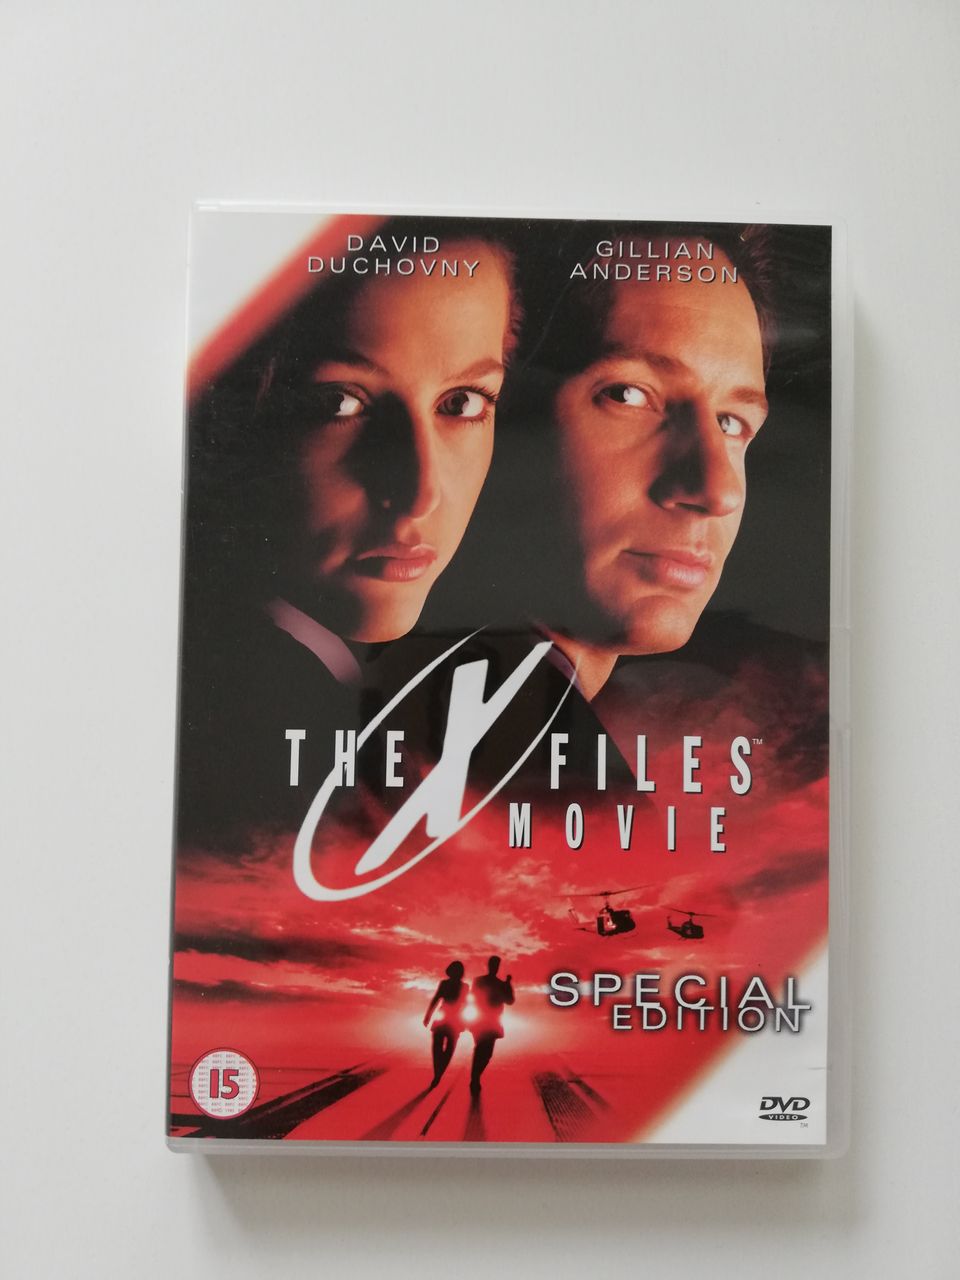 X-files Movie Special Edition DVD